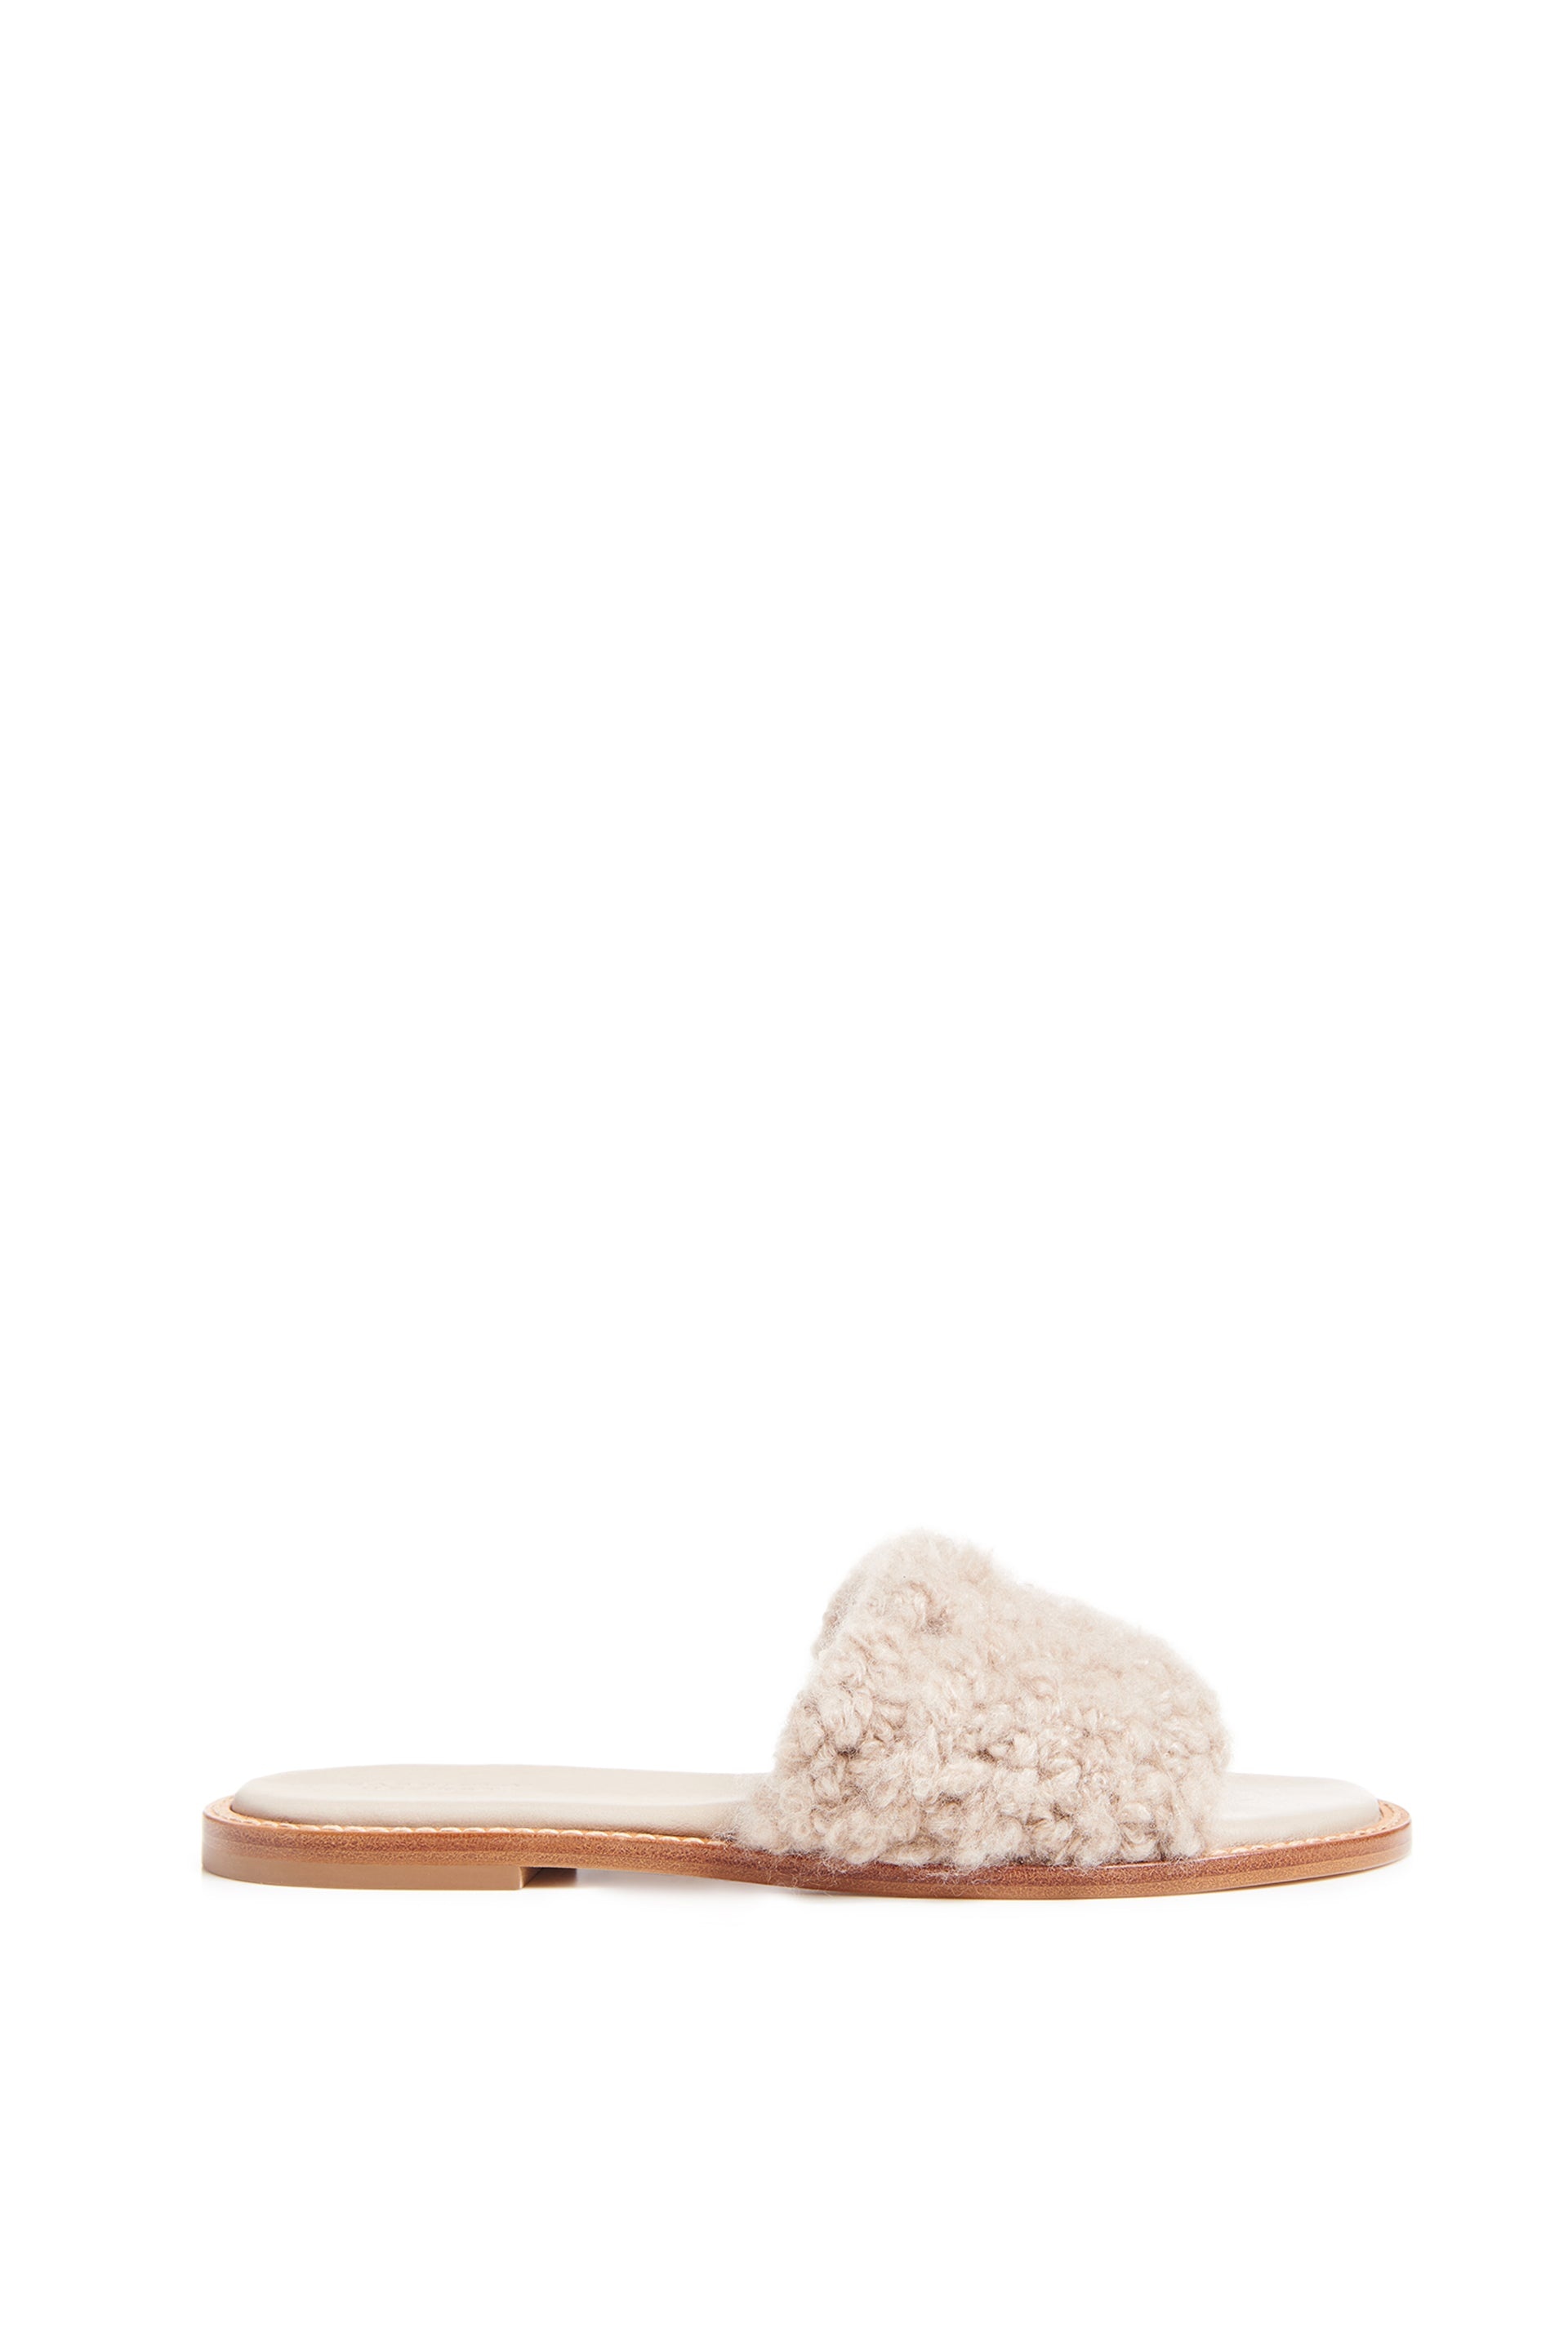 Ballast Slide in Oatmeal Leather & Cashmere - 1